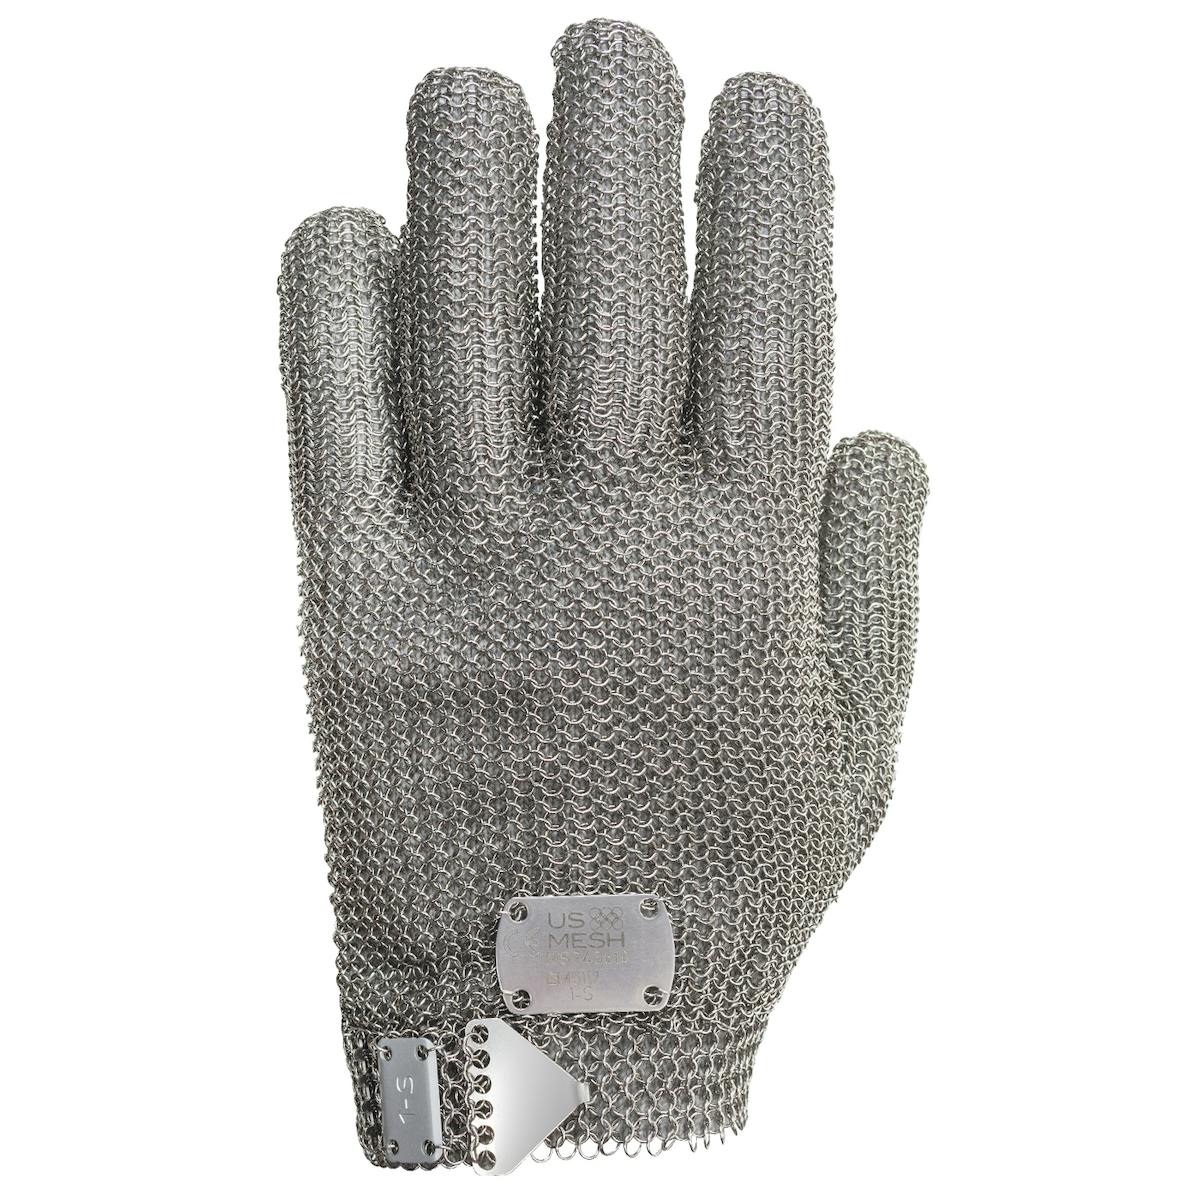 US Mesh® Stainless Steel Mesh Glove with Steel Prong Closure - Wrist Length (USM-1180)